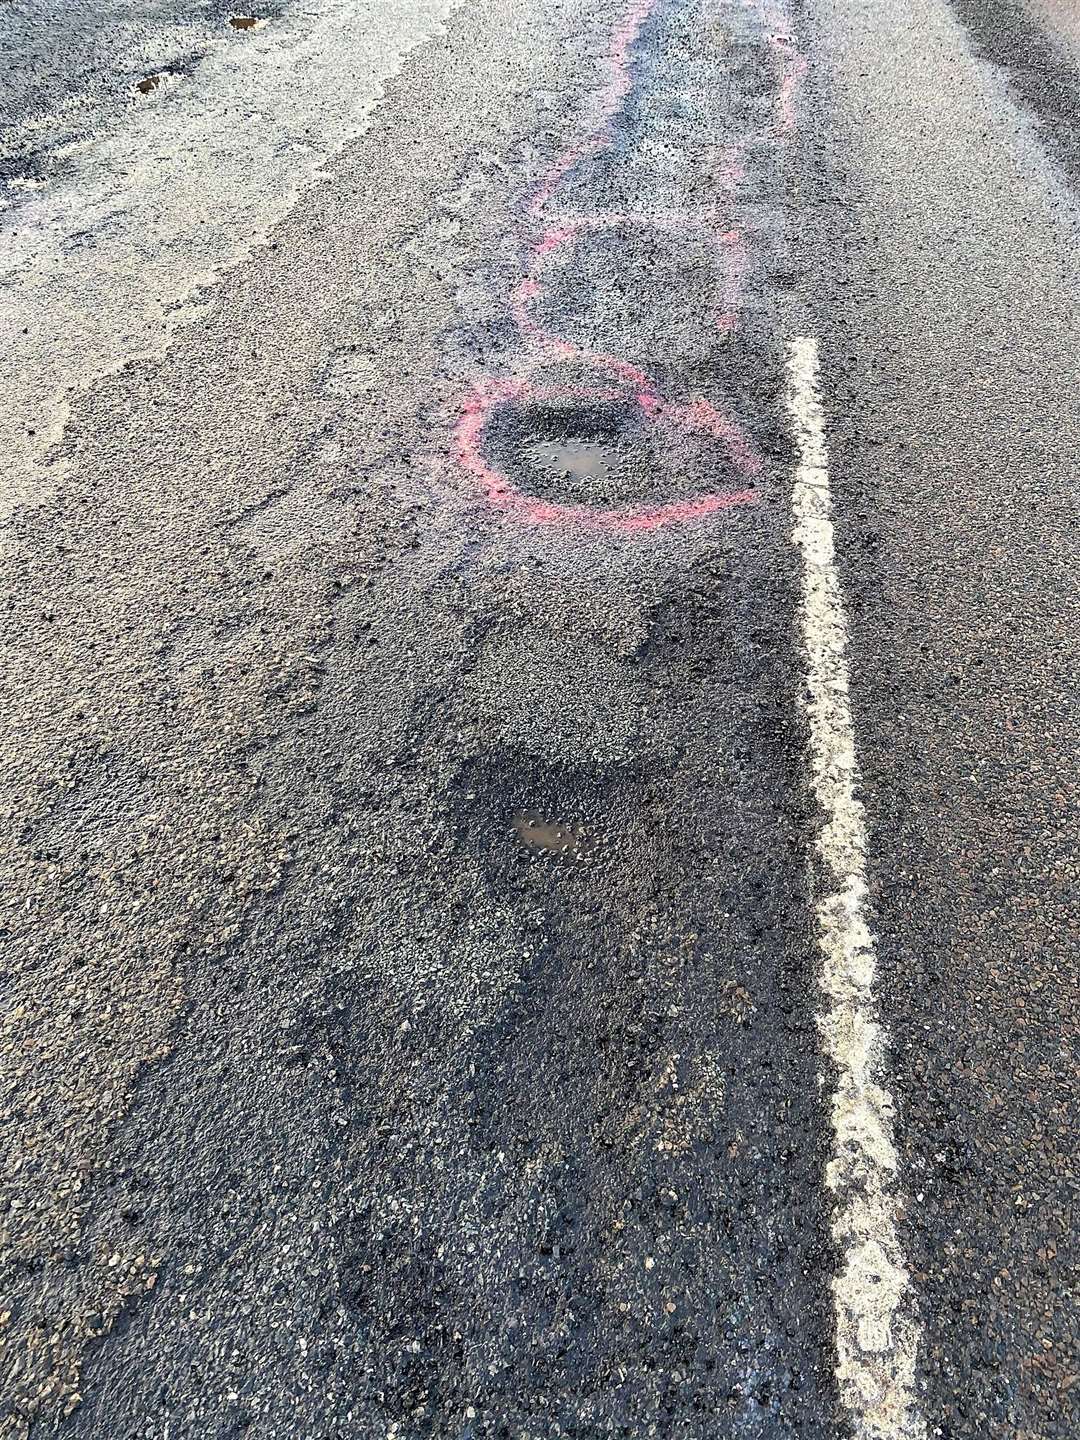 Terri sprayed some florescent pink paint around the worst potholes to warn other drivers. Pictures: Terri Munro